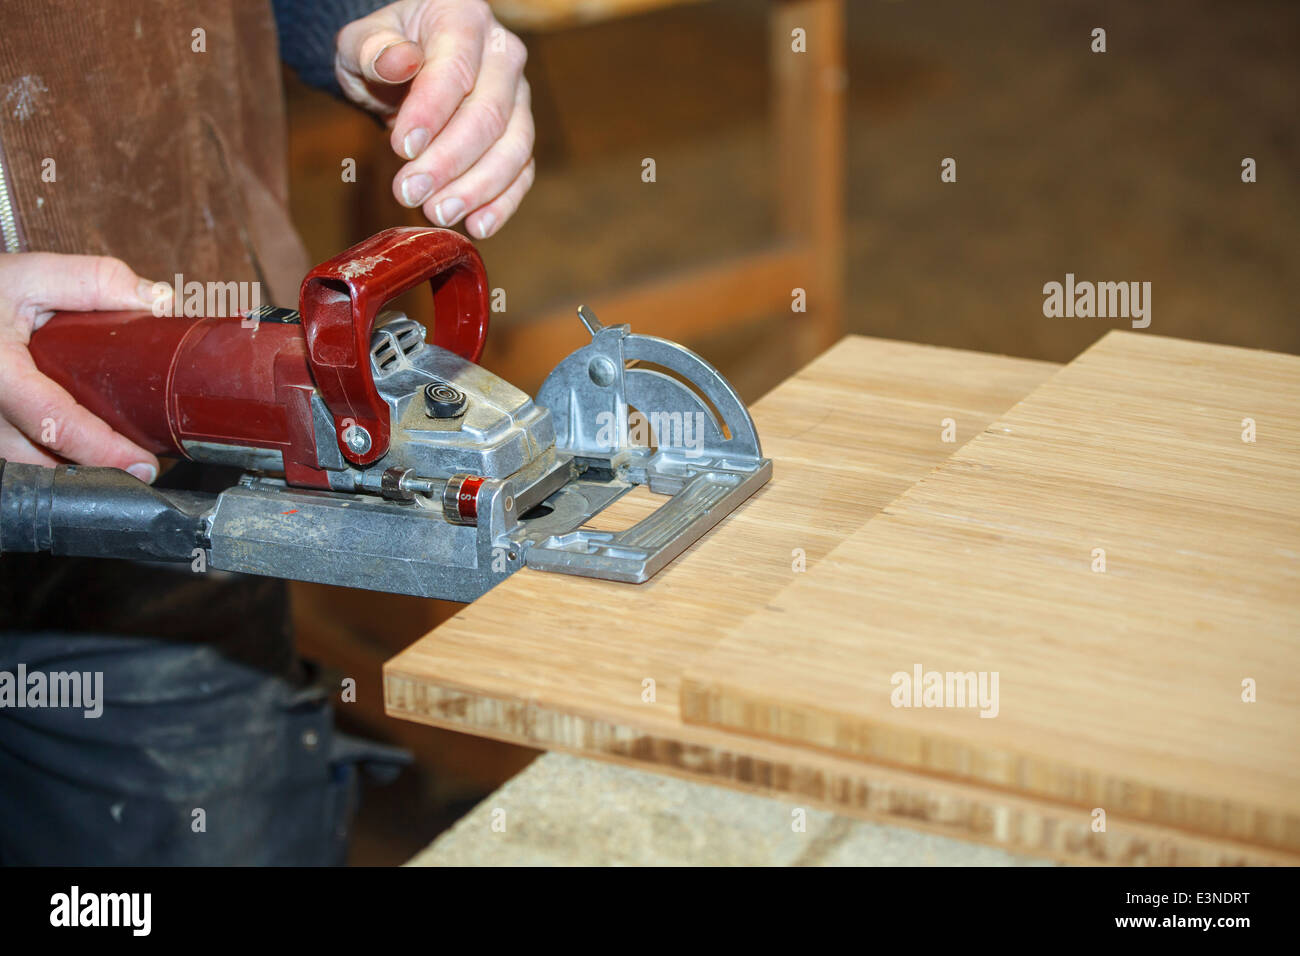 Close up of a carpenters hand working a plate joiner machine in the workshop Stock Photo